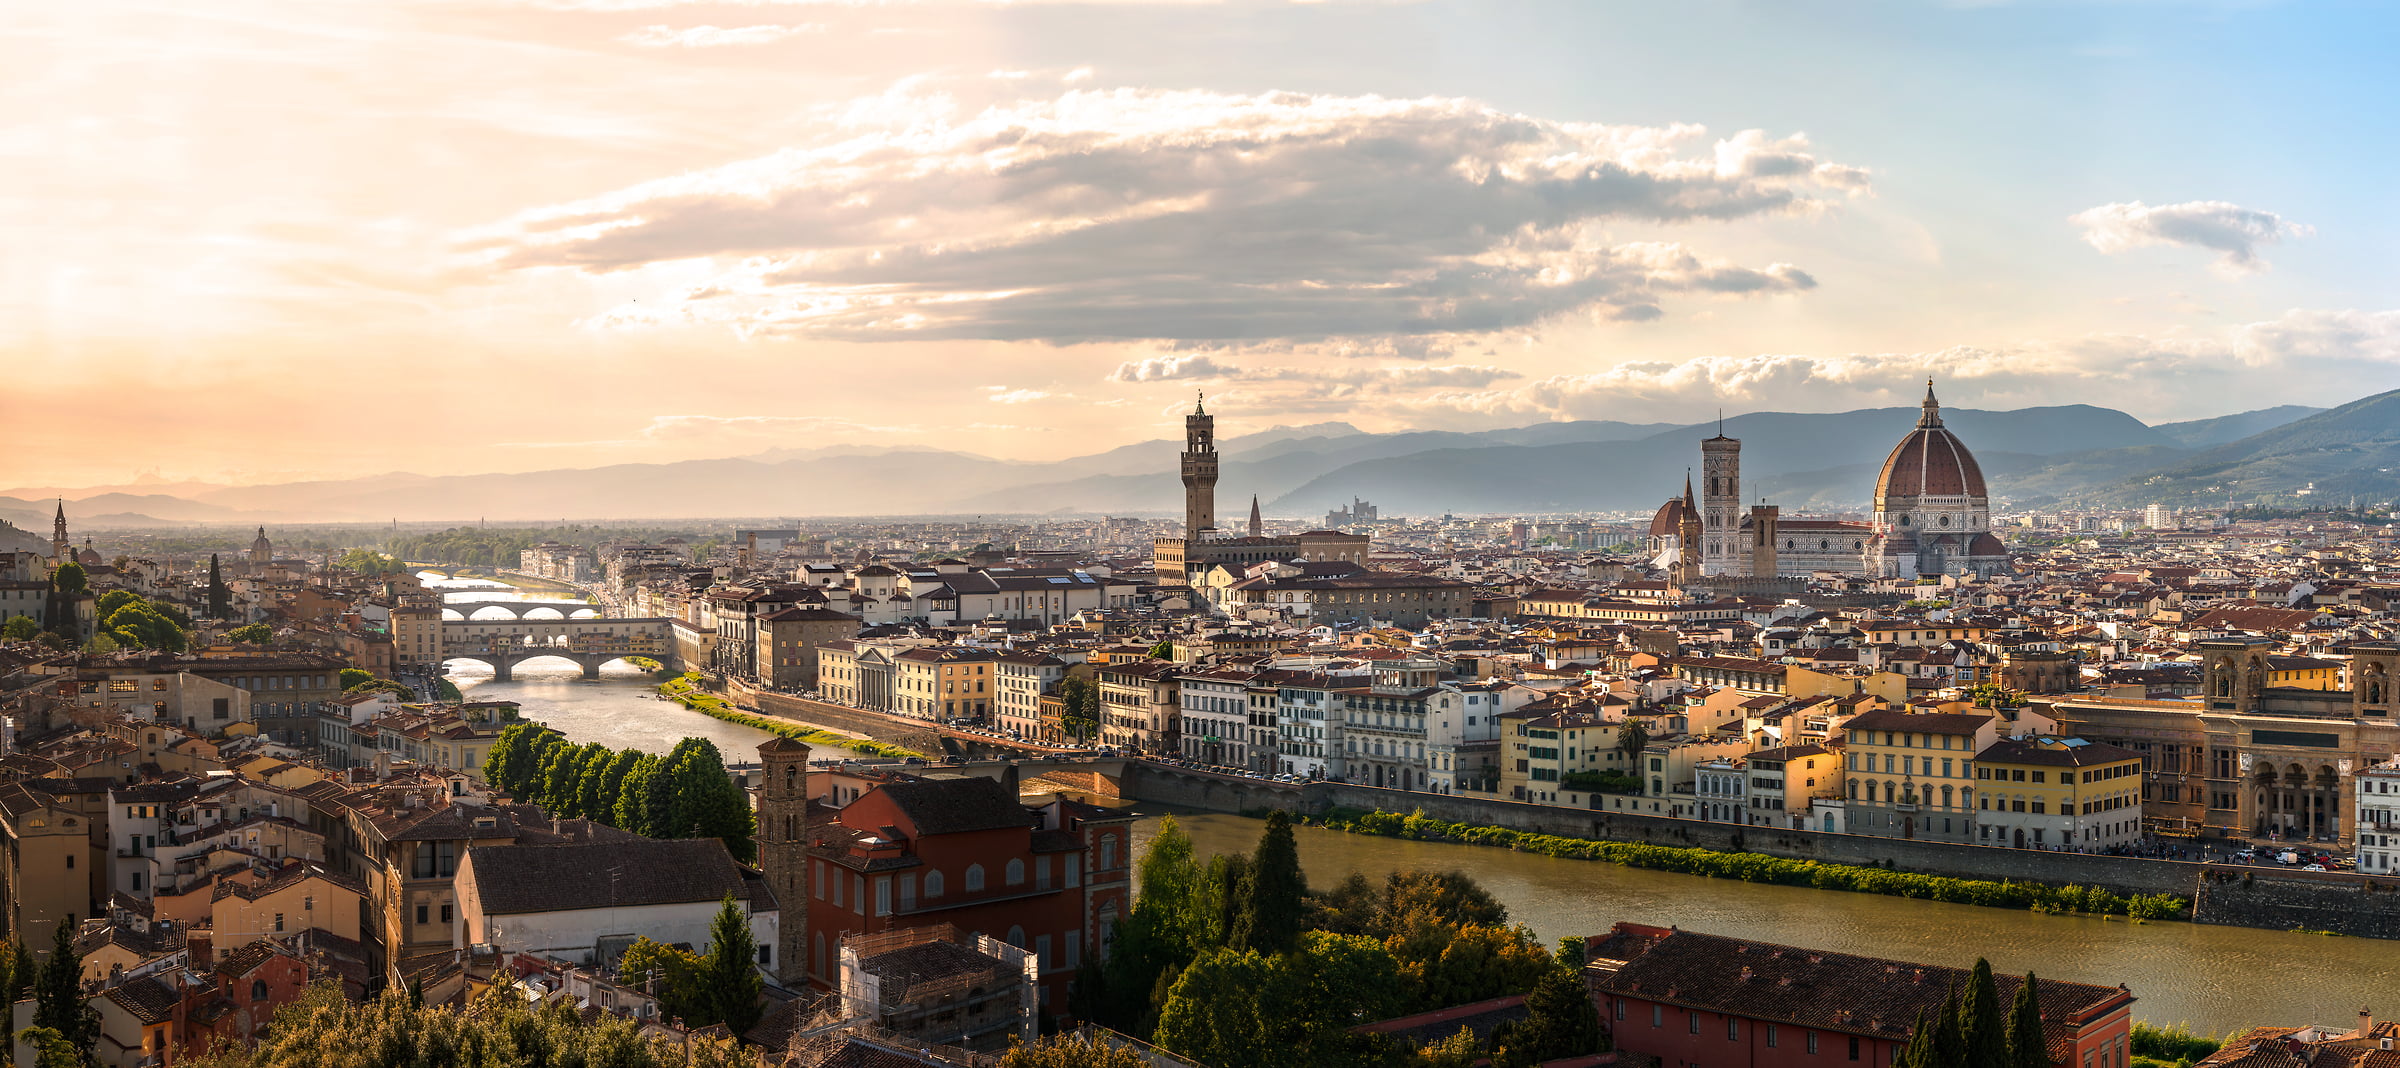 666 megapixels! A very high resolution, large-format VAST photo print of Florence, Italy at Sunset with the Cathedral of Santa Maria del Fiore, The Palazzo Vecchio, and the Arno river; fine art cityscape landscape photograph created by Justin Katz in Florence, Tuscany, Italy